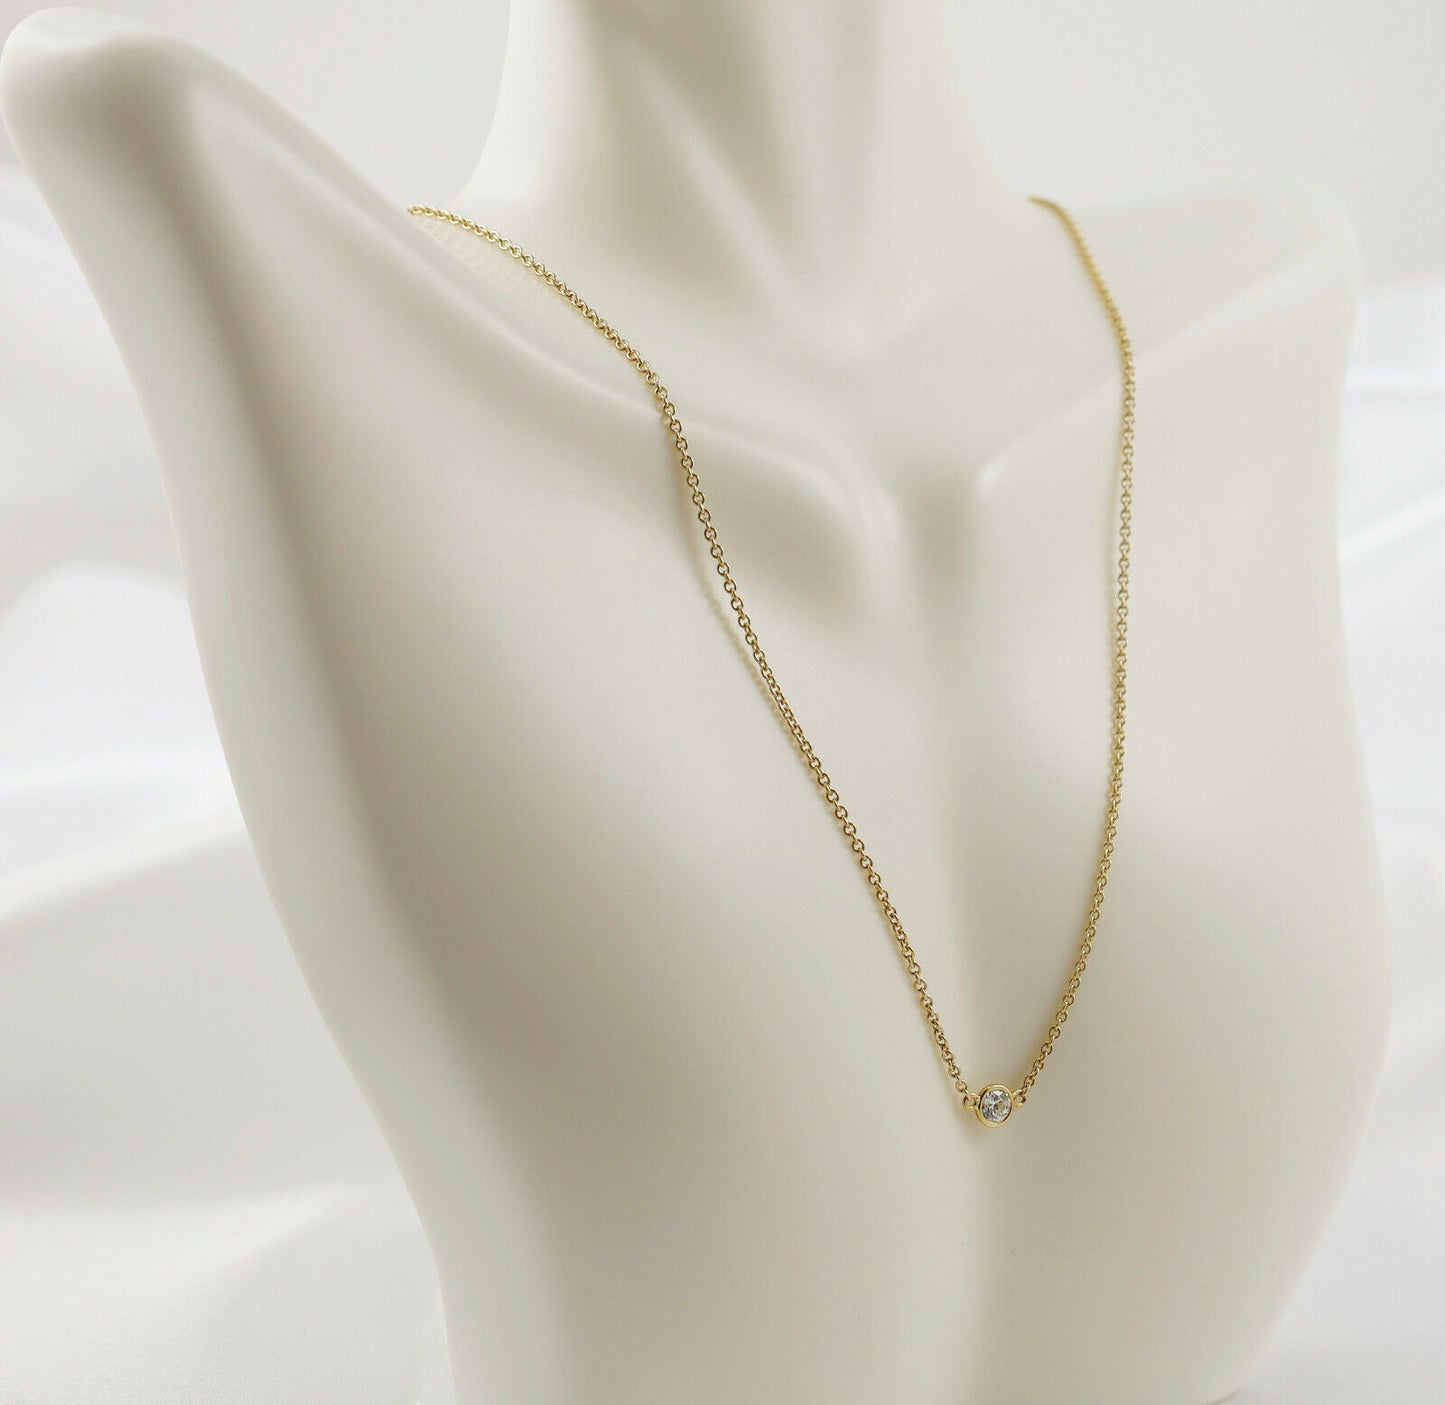 14k Yellow Gold Single Diamond Necklace, 16 inches - 2.3g